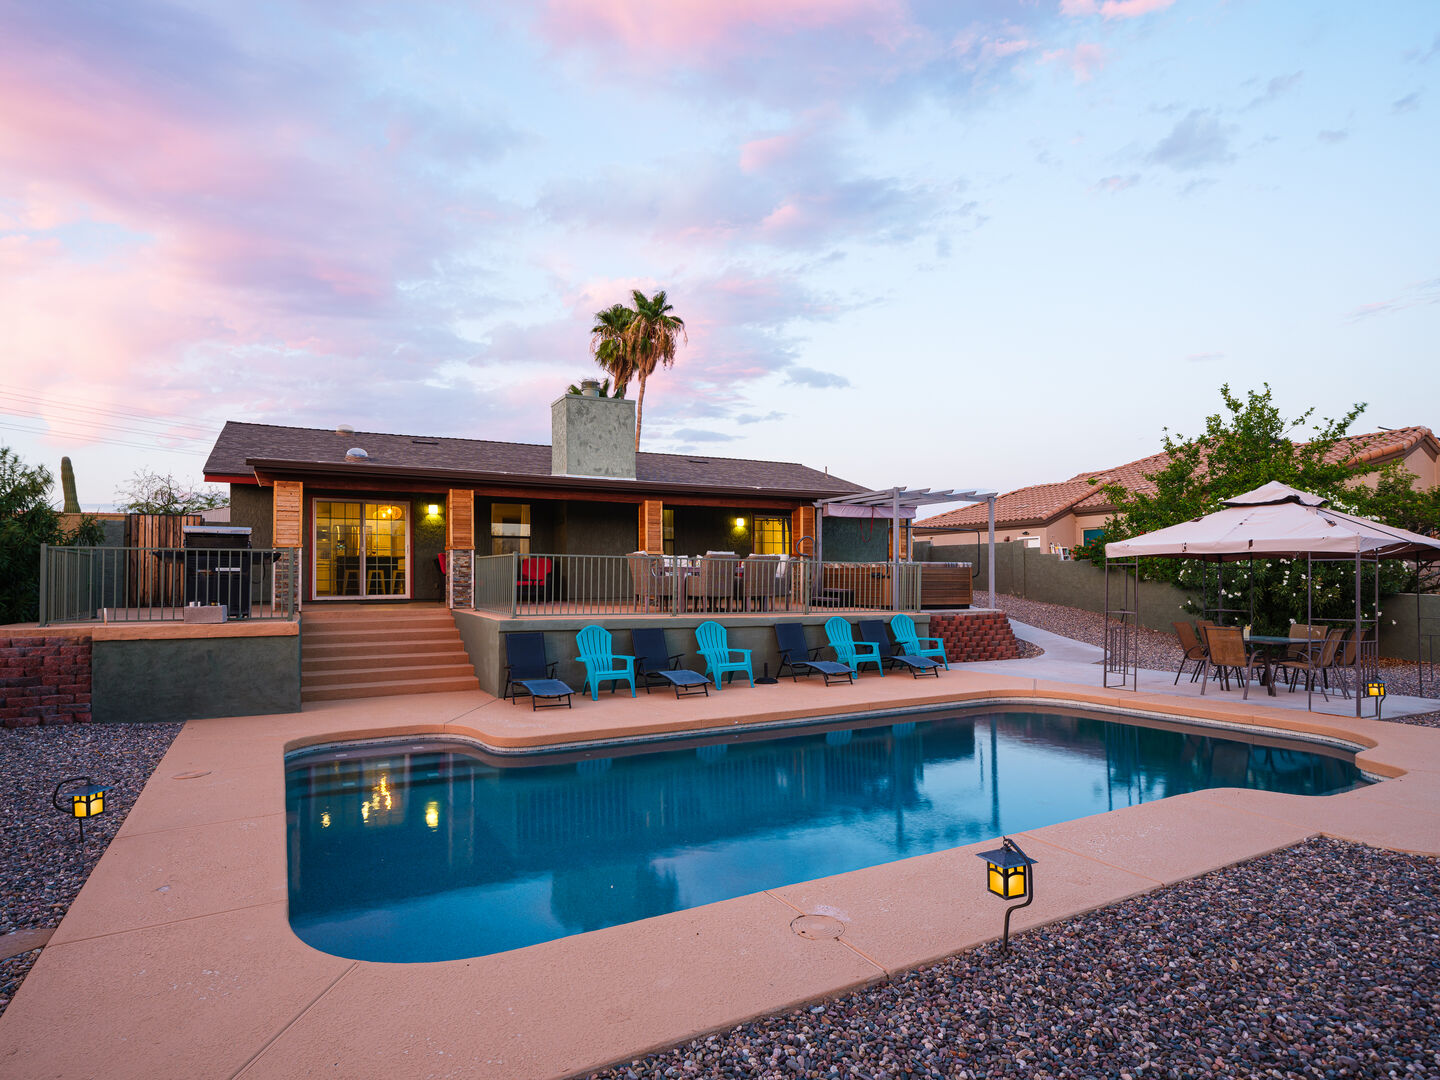 Your family can enjoy the convenience of this private pool while beating the Arizona heat.